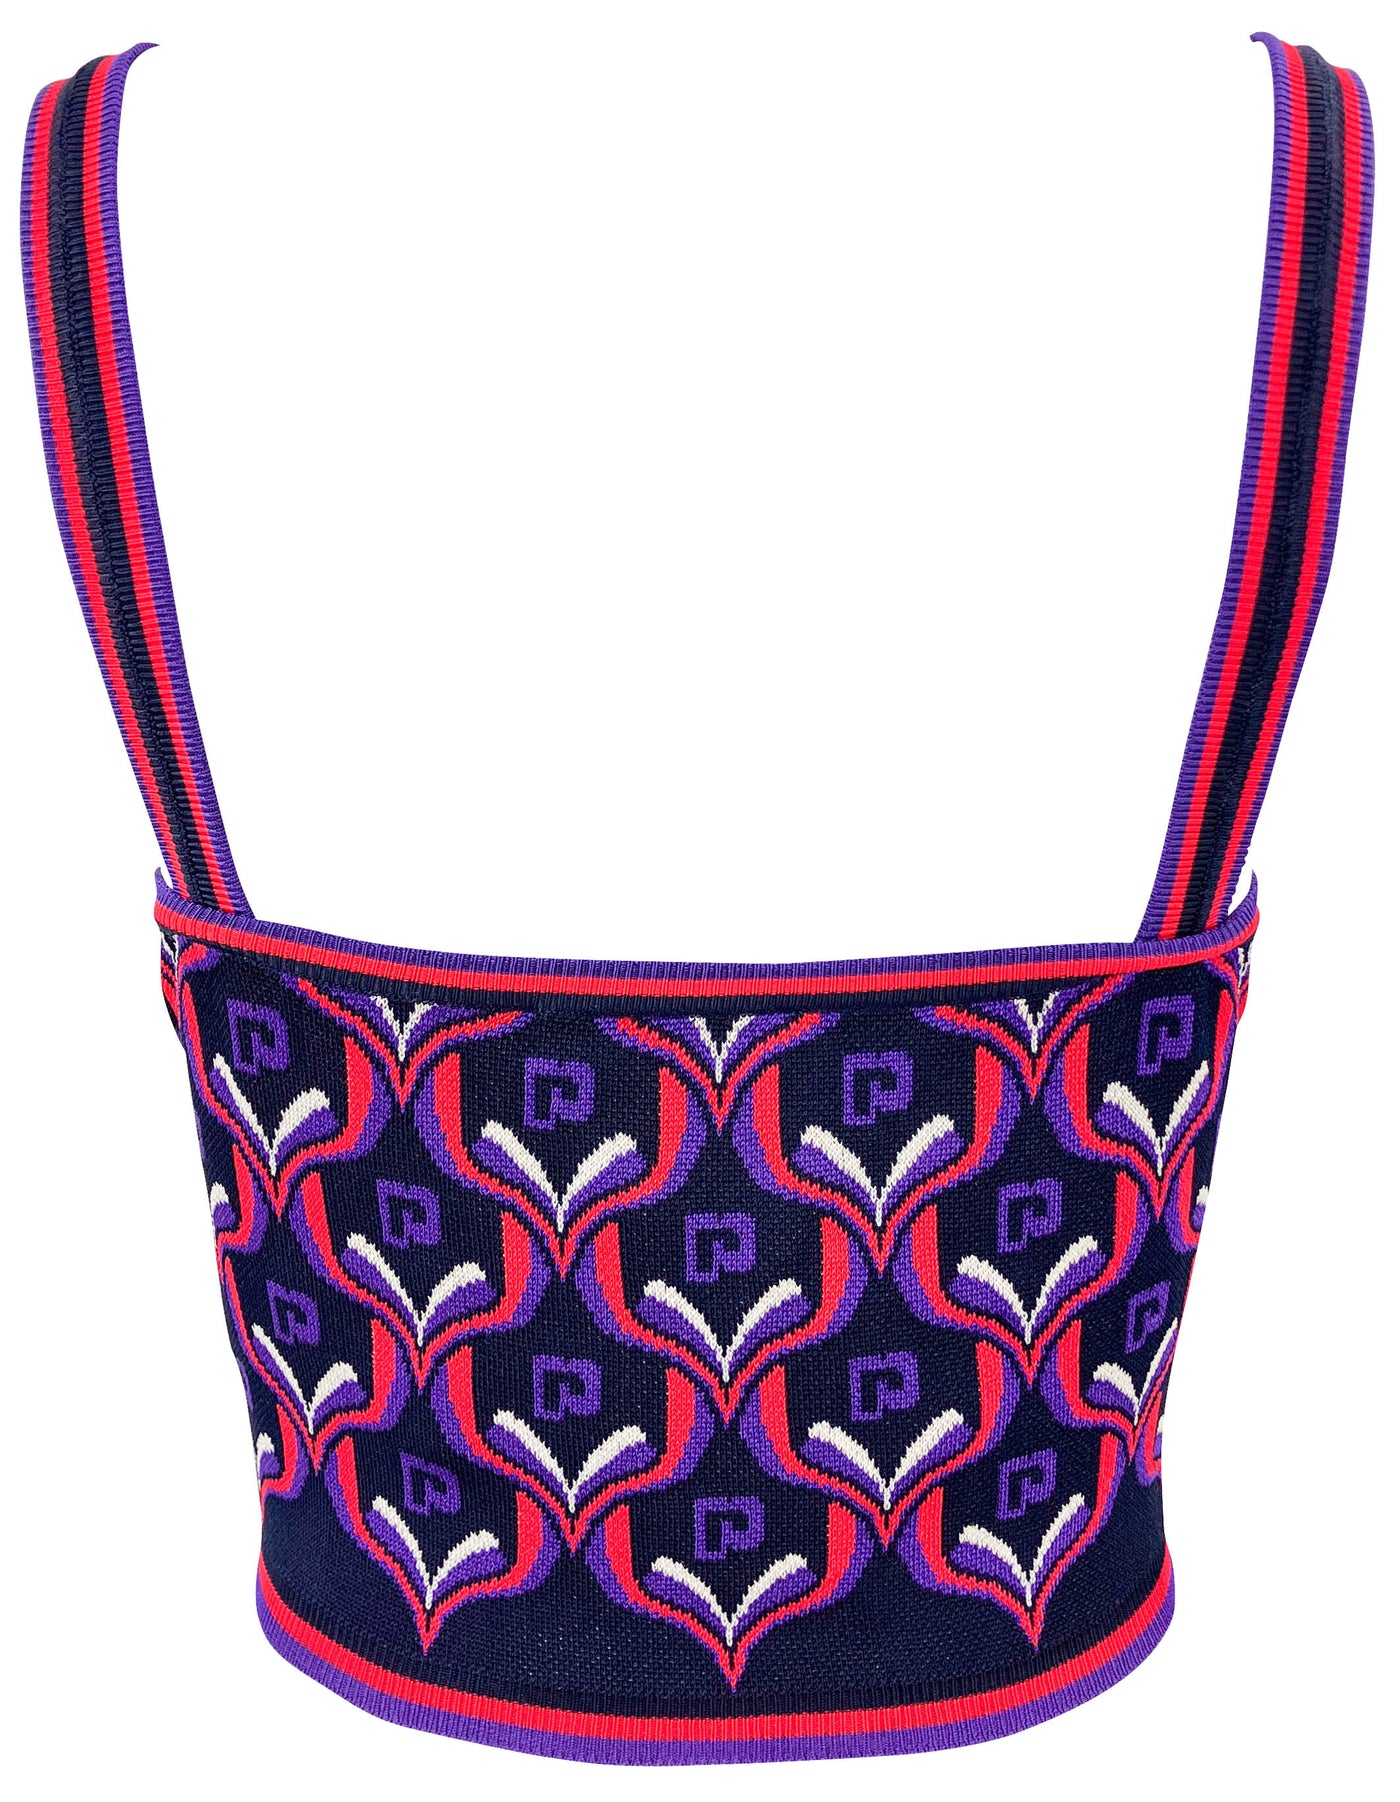 Paco Rabanne Monogram Knit Tank Top in Red/Purple - Discounts on Paco Rabanne at UAL